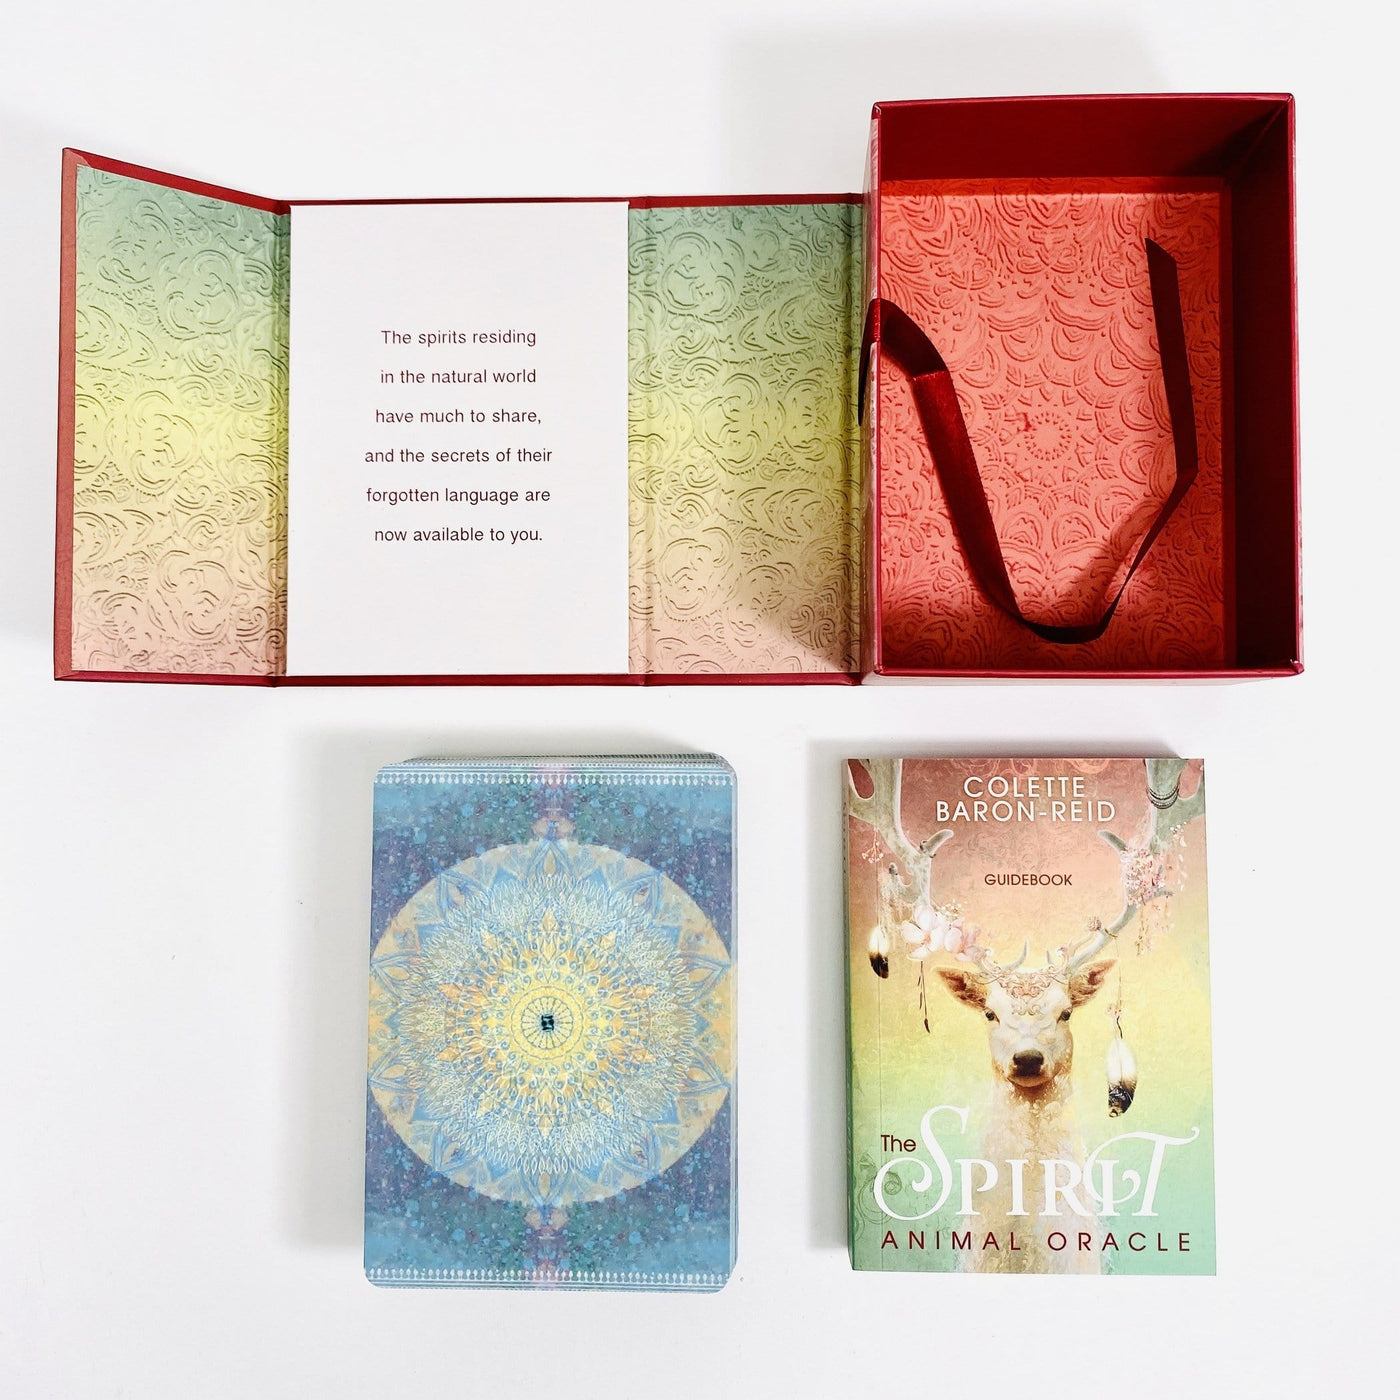 The box is open showing you a saying " The spirits residing in the natural world have much to share, and the secrets of their forgotten language are now available to you " .